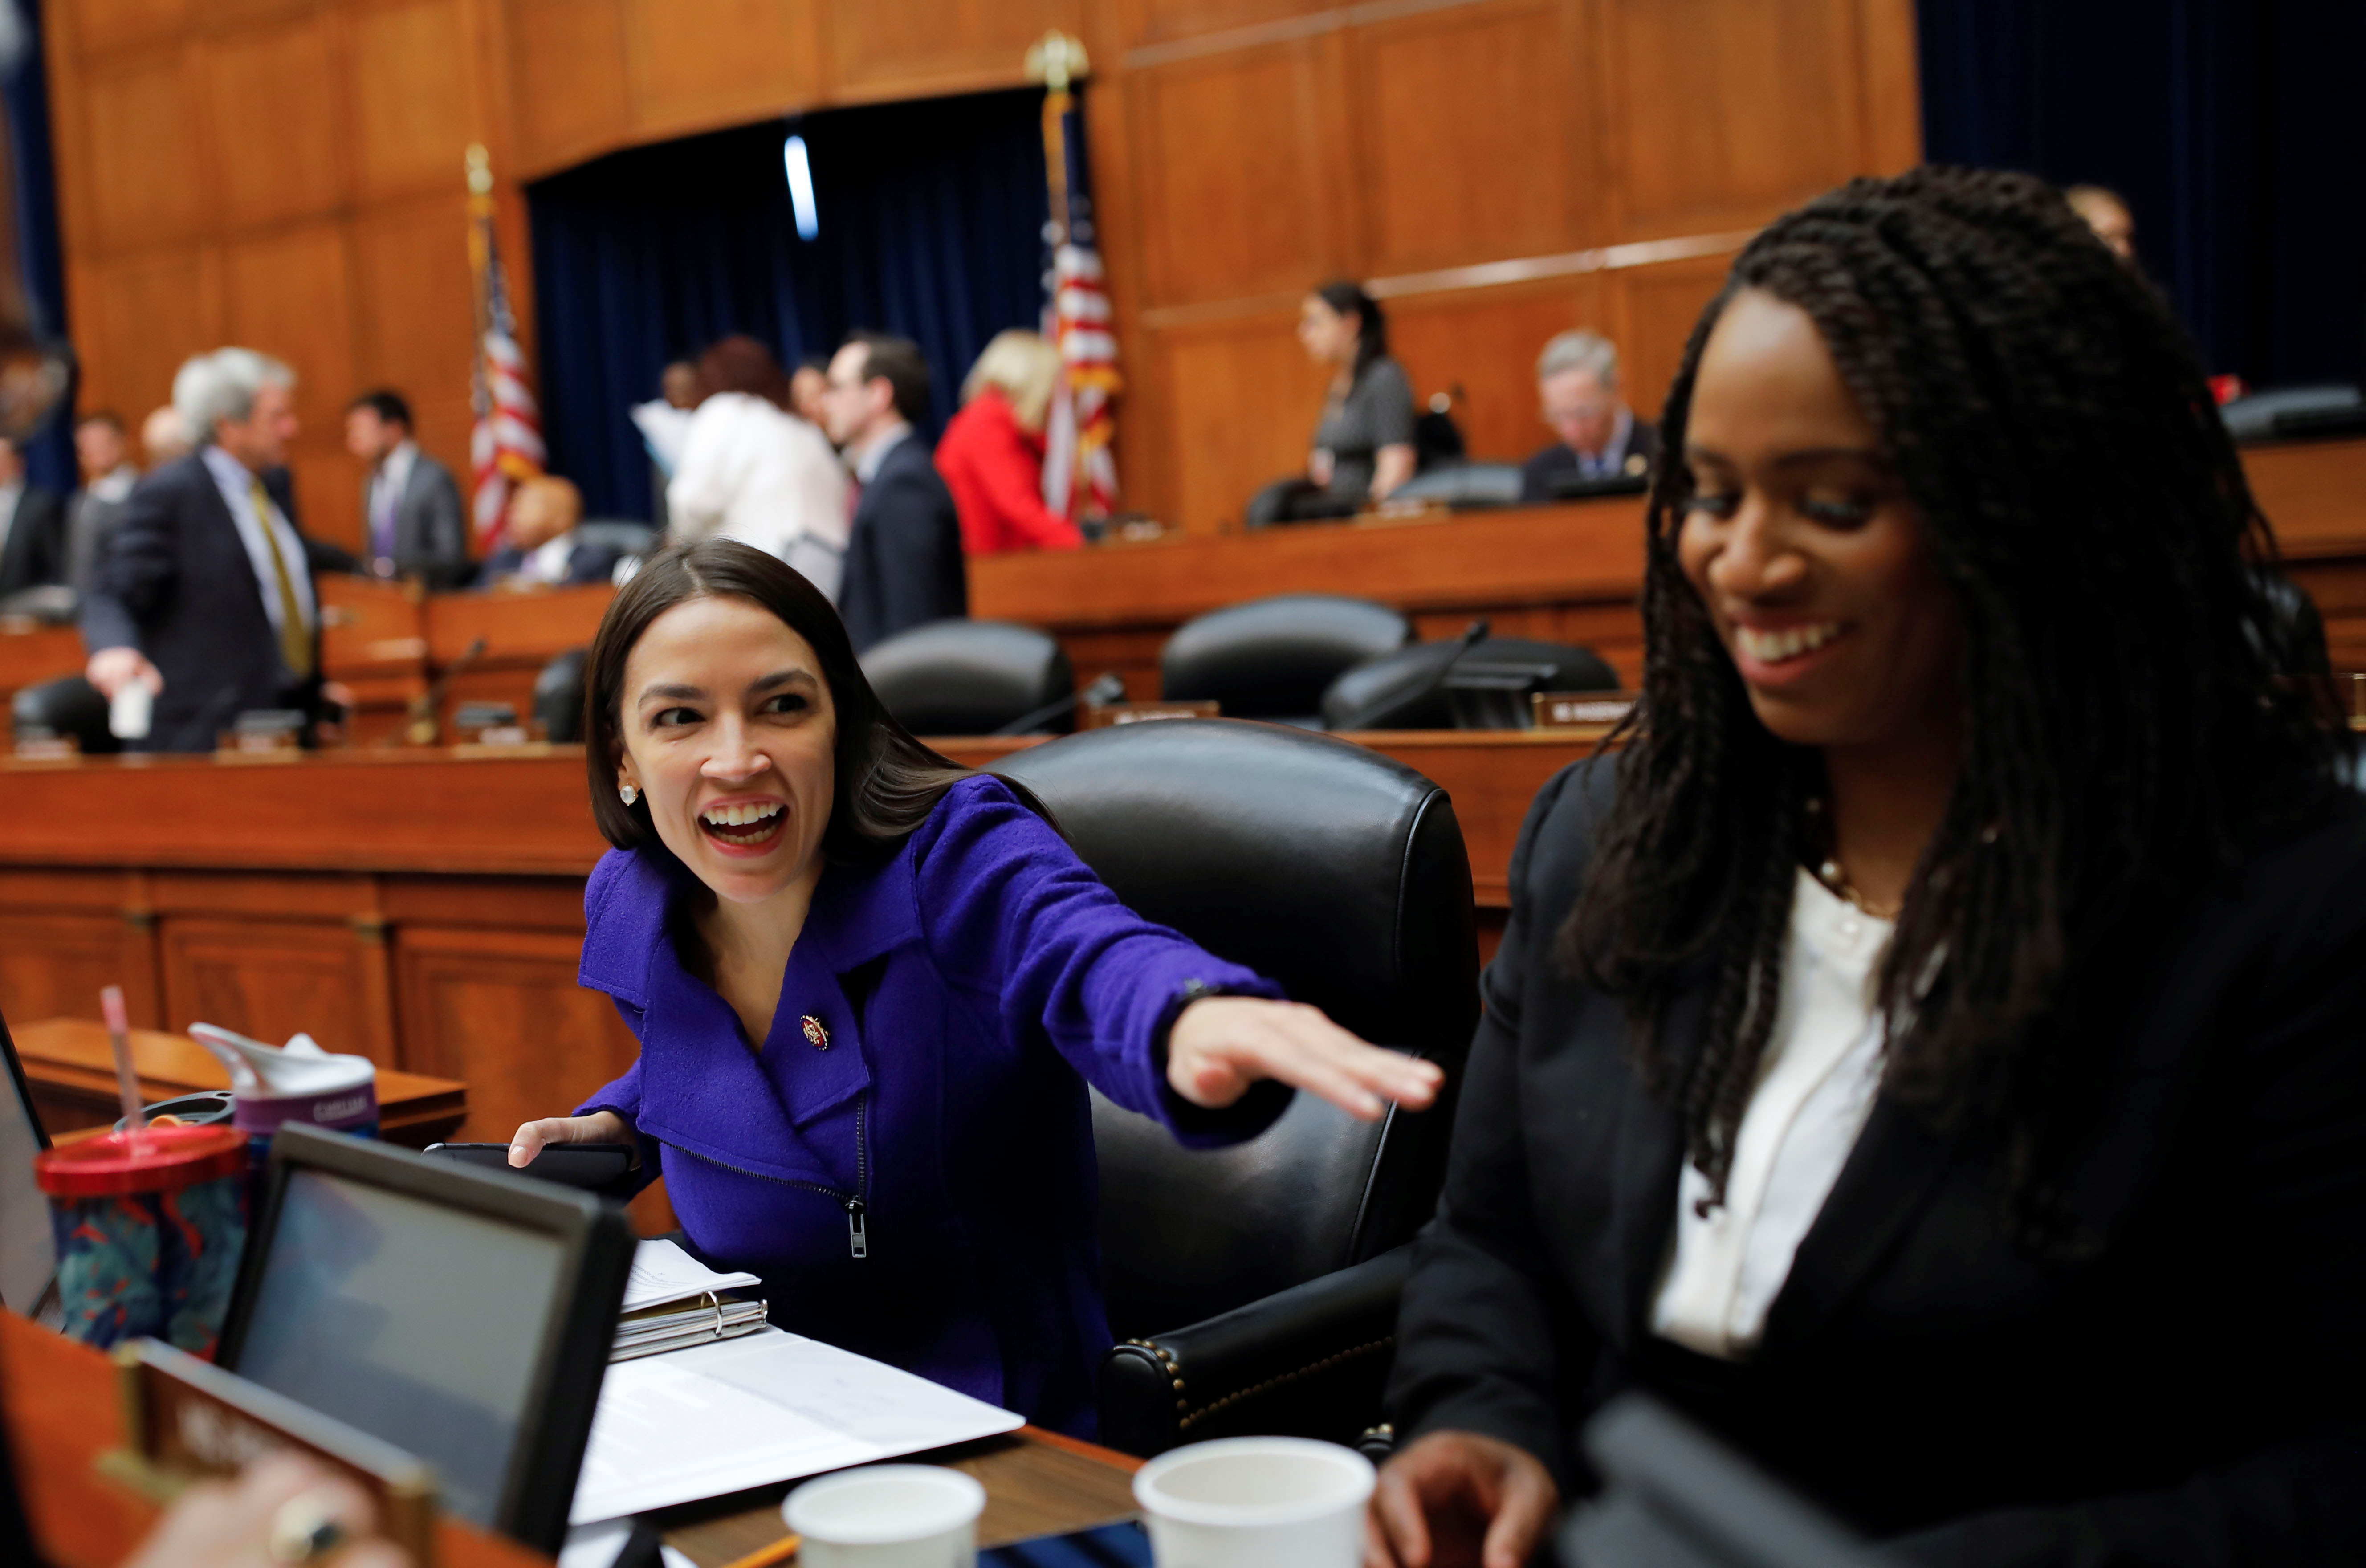 U.S. Rep. Alexandria Ocasio-Cortez laughs with Rep. Pressley after House Oversight and Reform Committee voted to subpeona White House about security clearances on Capitol Hill in Washington